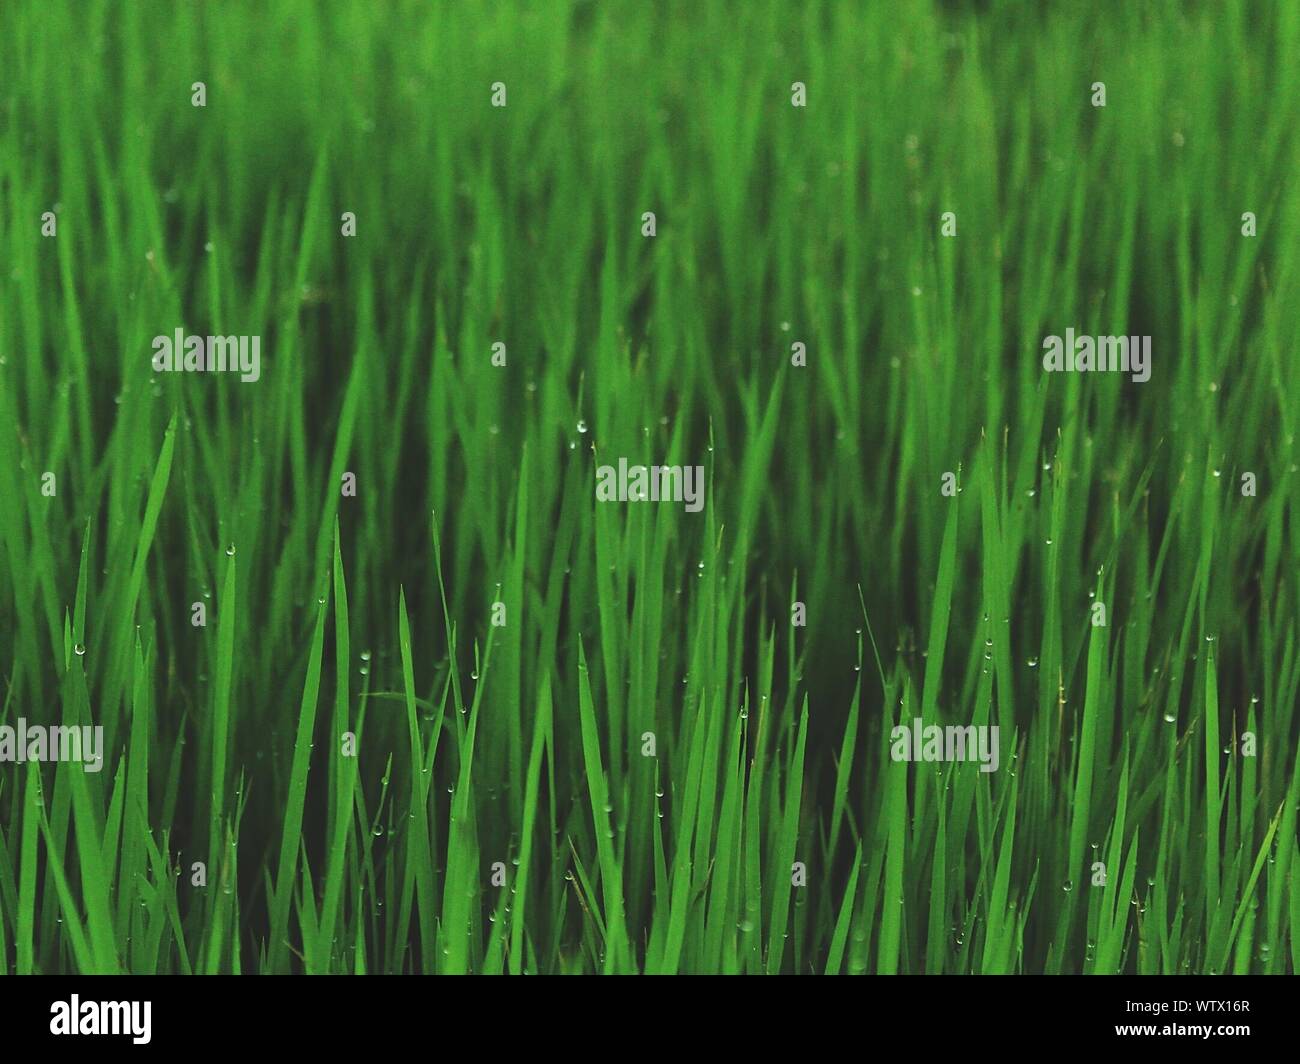 Full Frame Shot Of Wheat Growing On Field Stock Photo